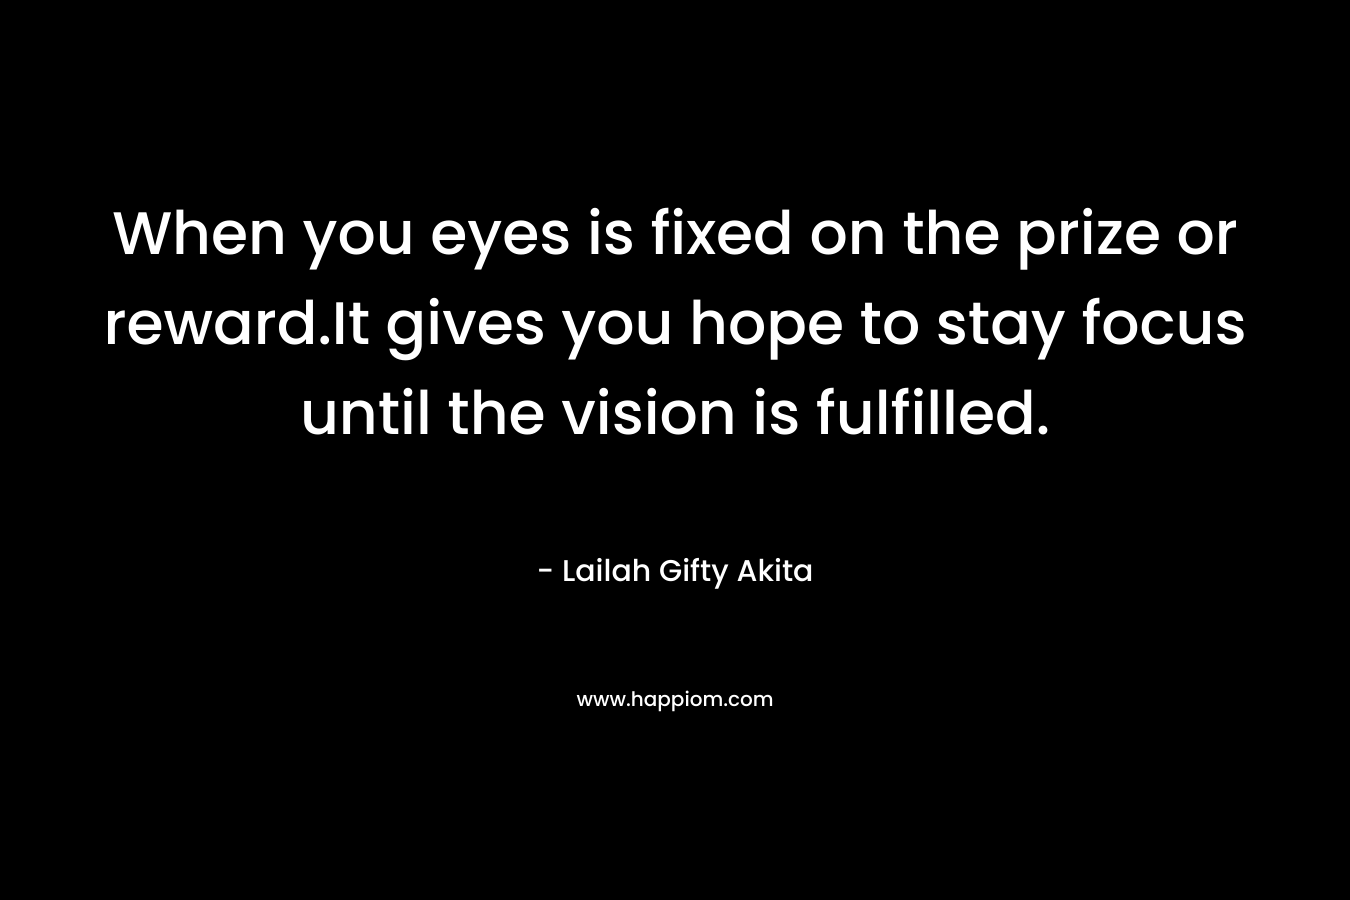 When you eyes is fixed on the prize or reward.It gives you hope to stay focus until the vision is fulfilled. – Lailah Gifty Akita